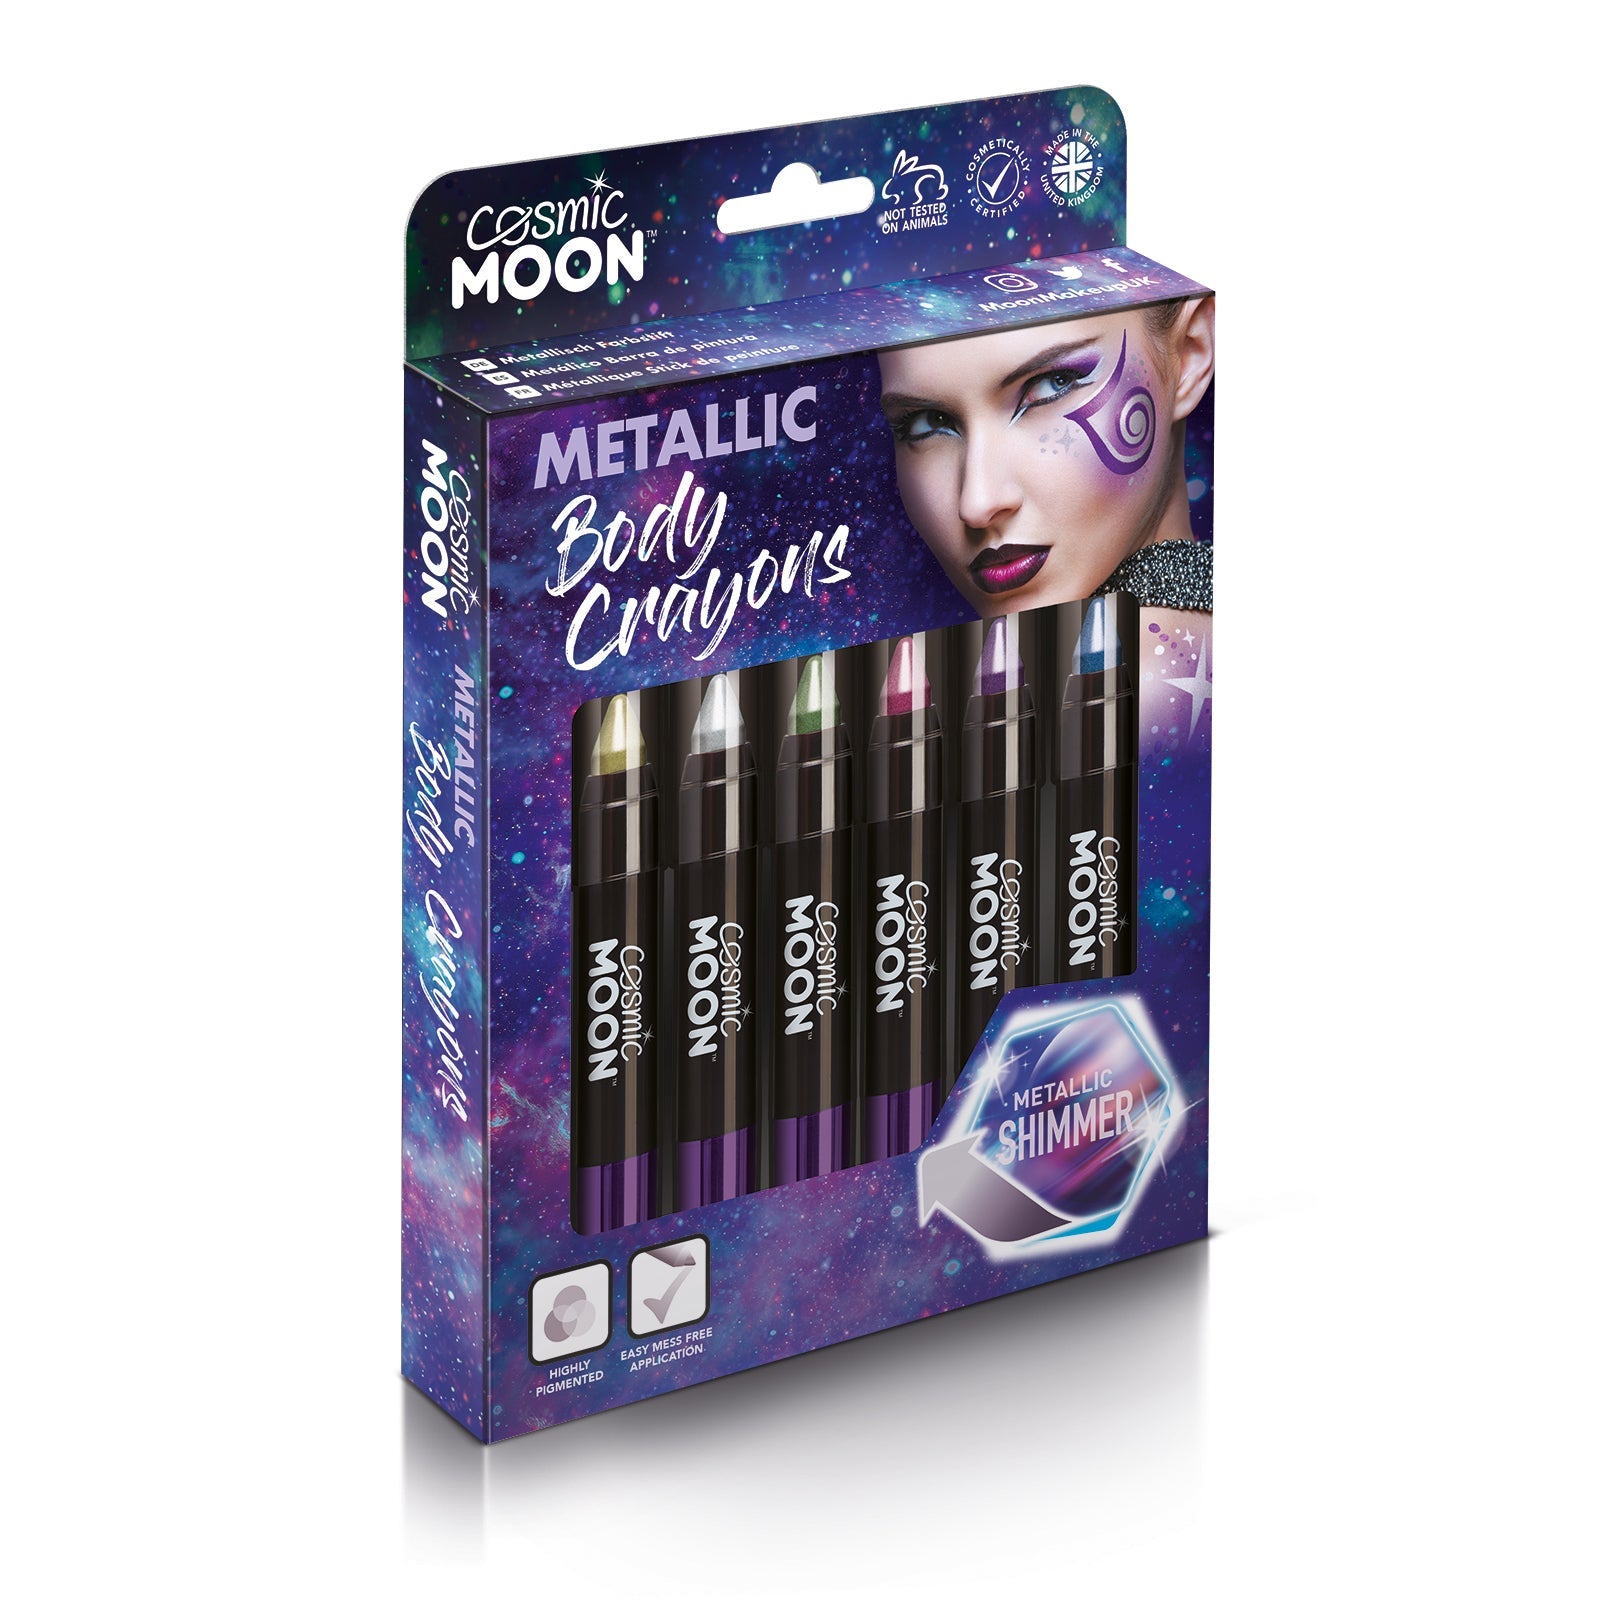 Metallic Face & Body Crayons Boxset - 6 crayons. Cosmetically certified, FDA & Health Canada compliant and cruelty free.